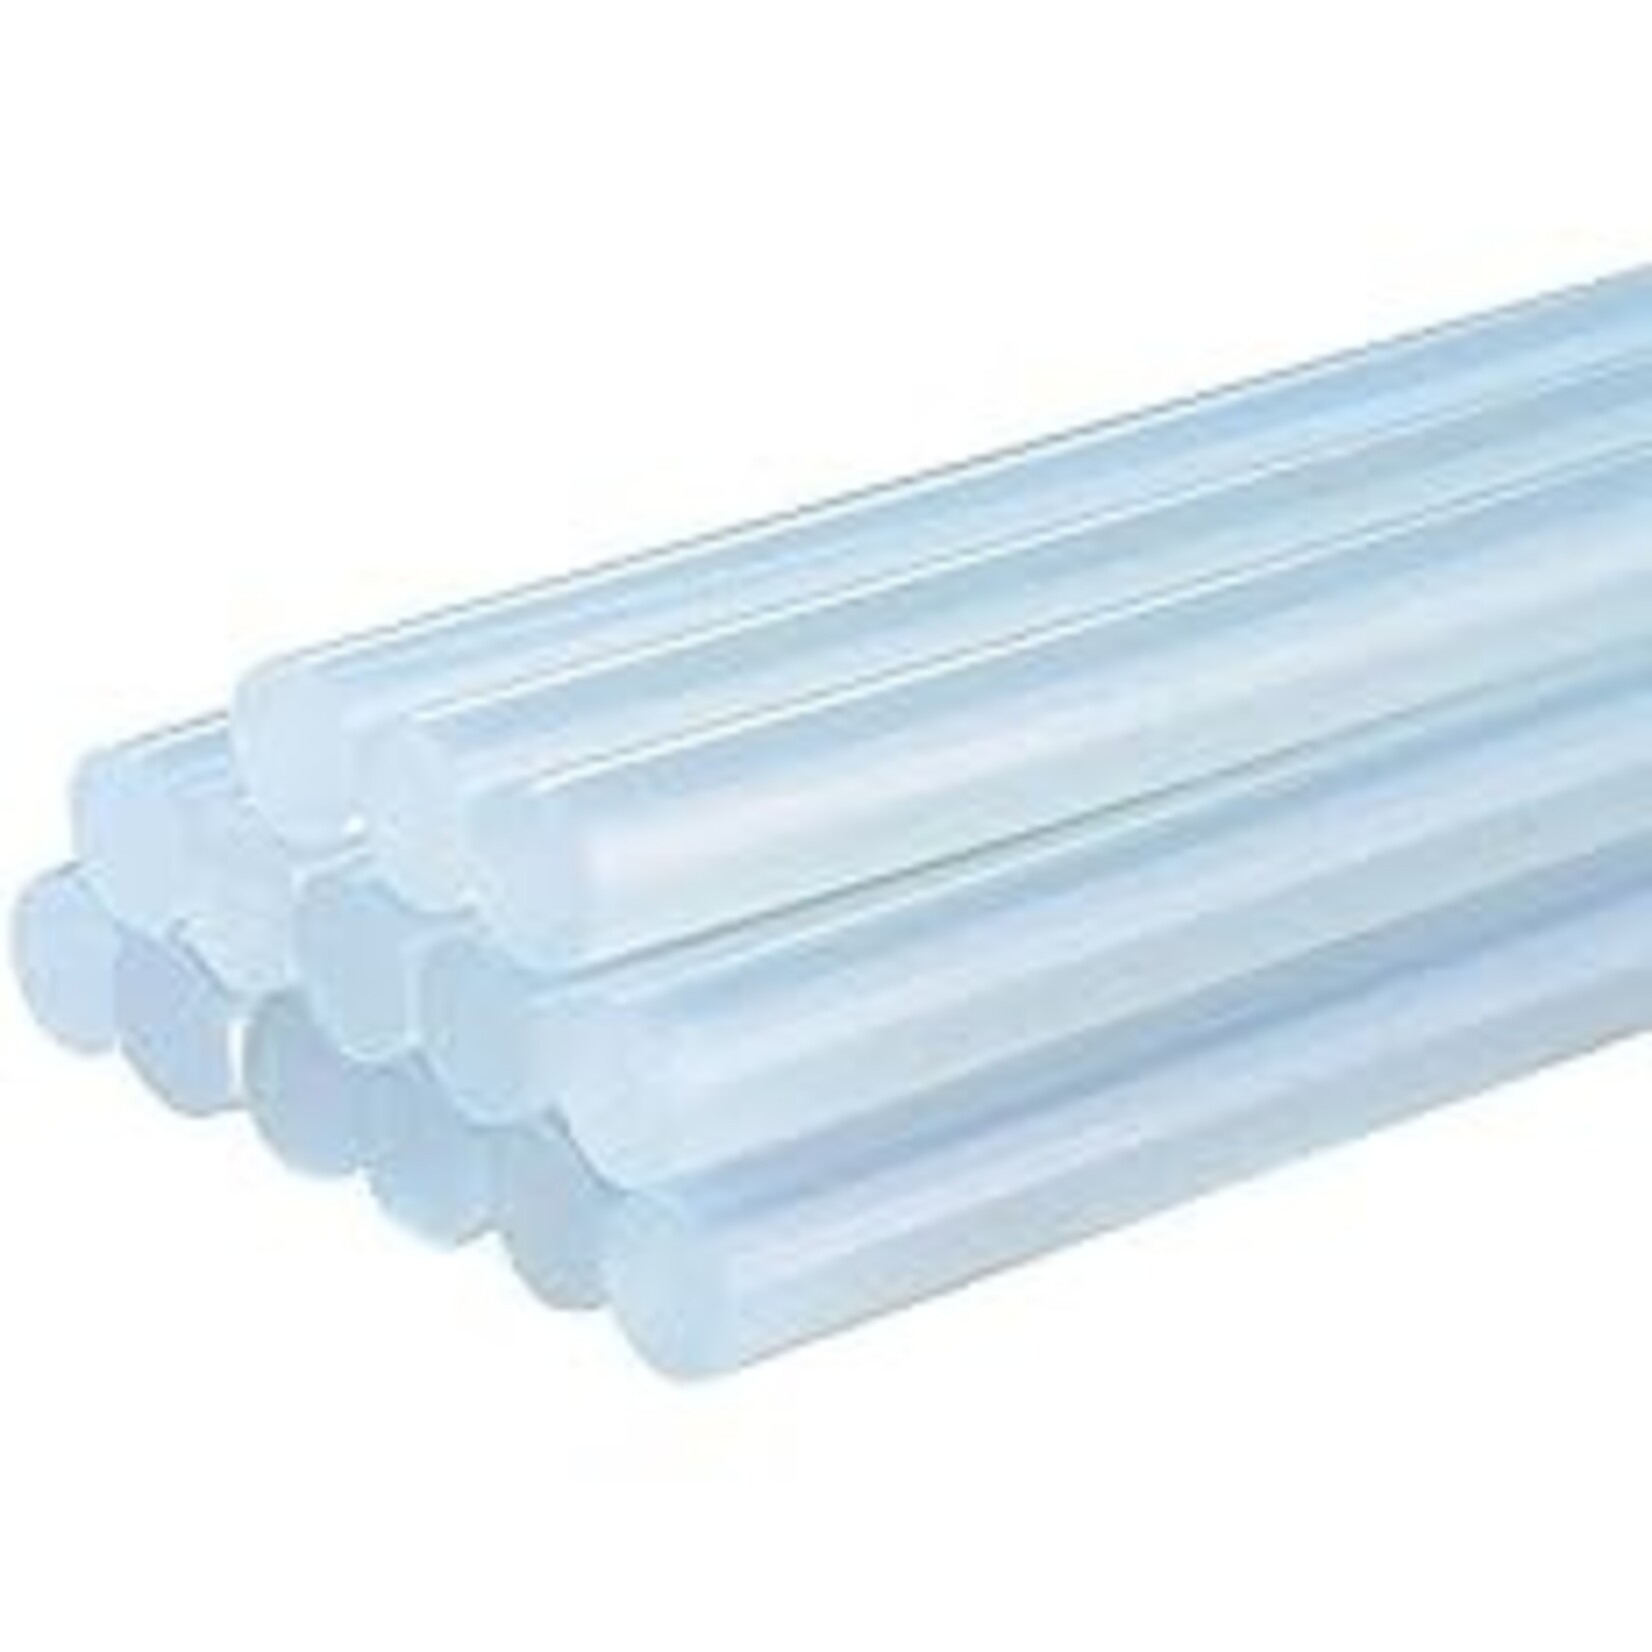 Glue Sticks (1/2") Large - 1kg Pack (approx 35 pieces)  Made in Taiwan